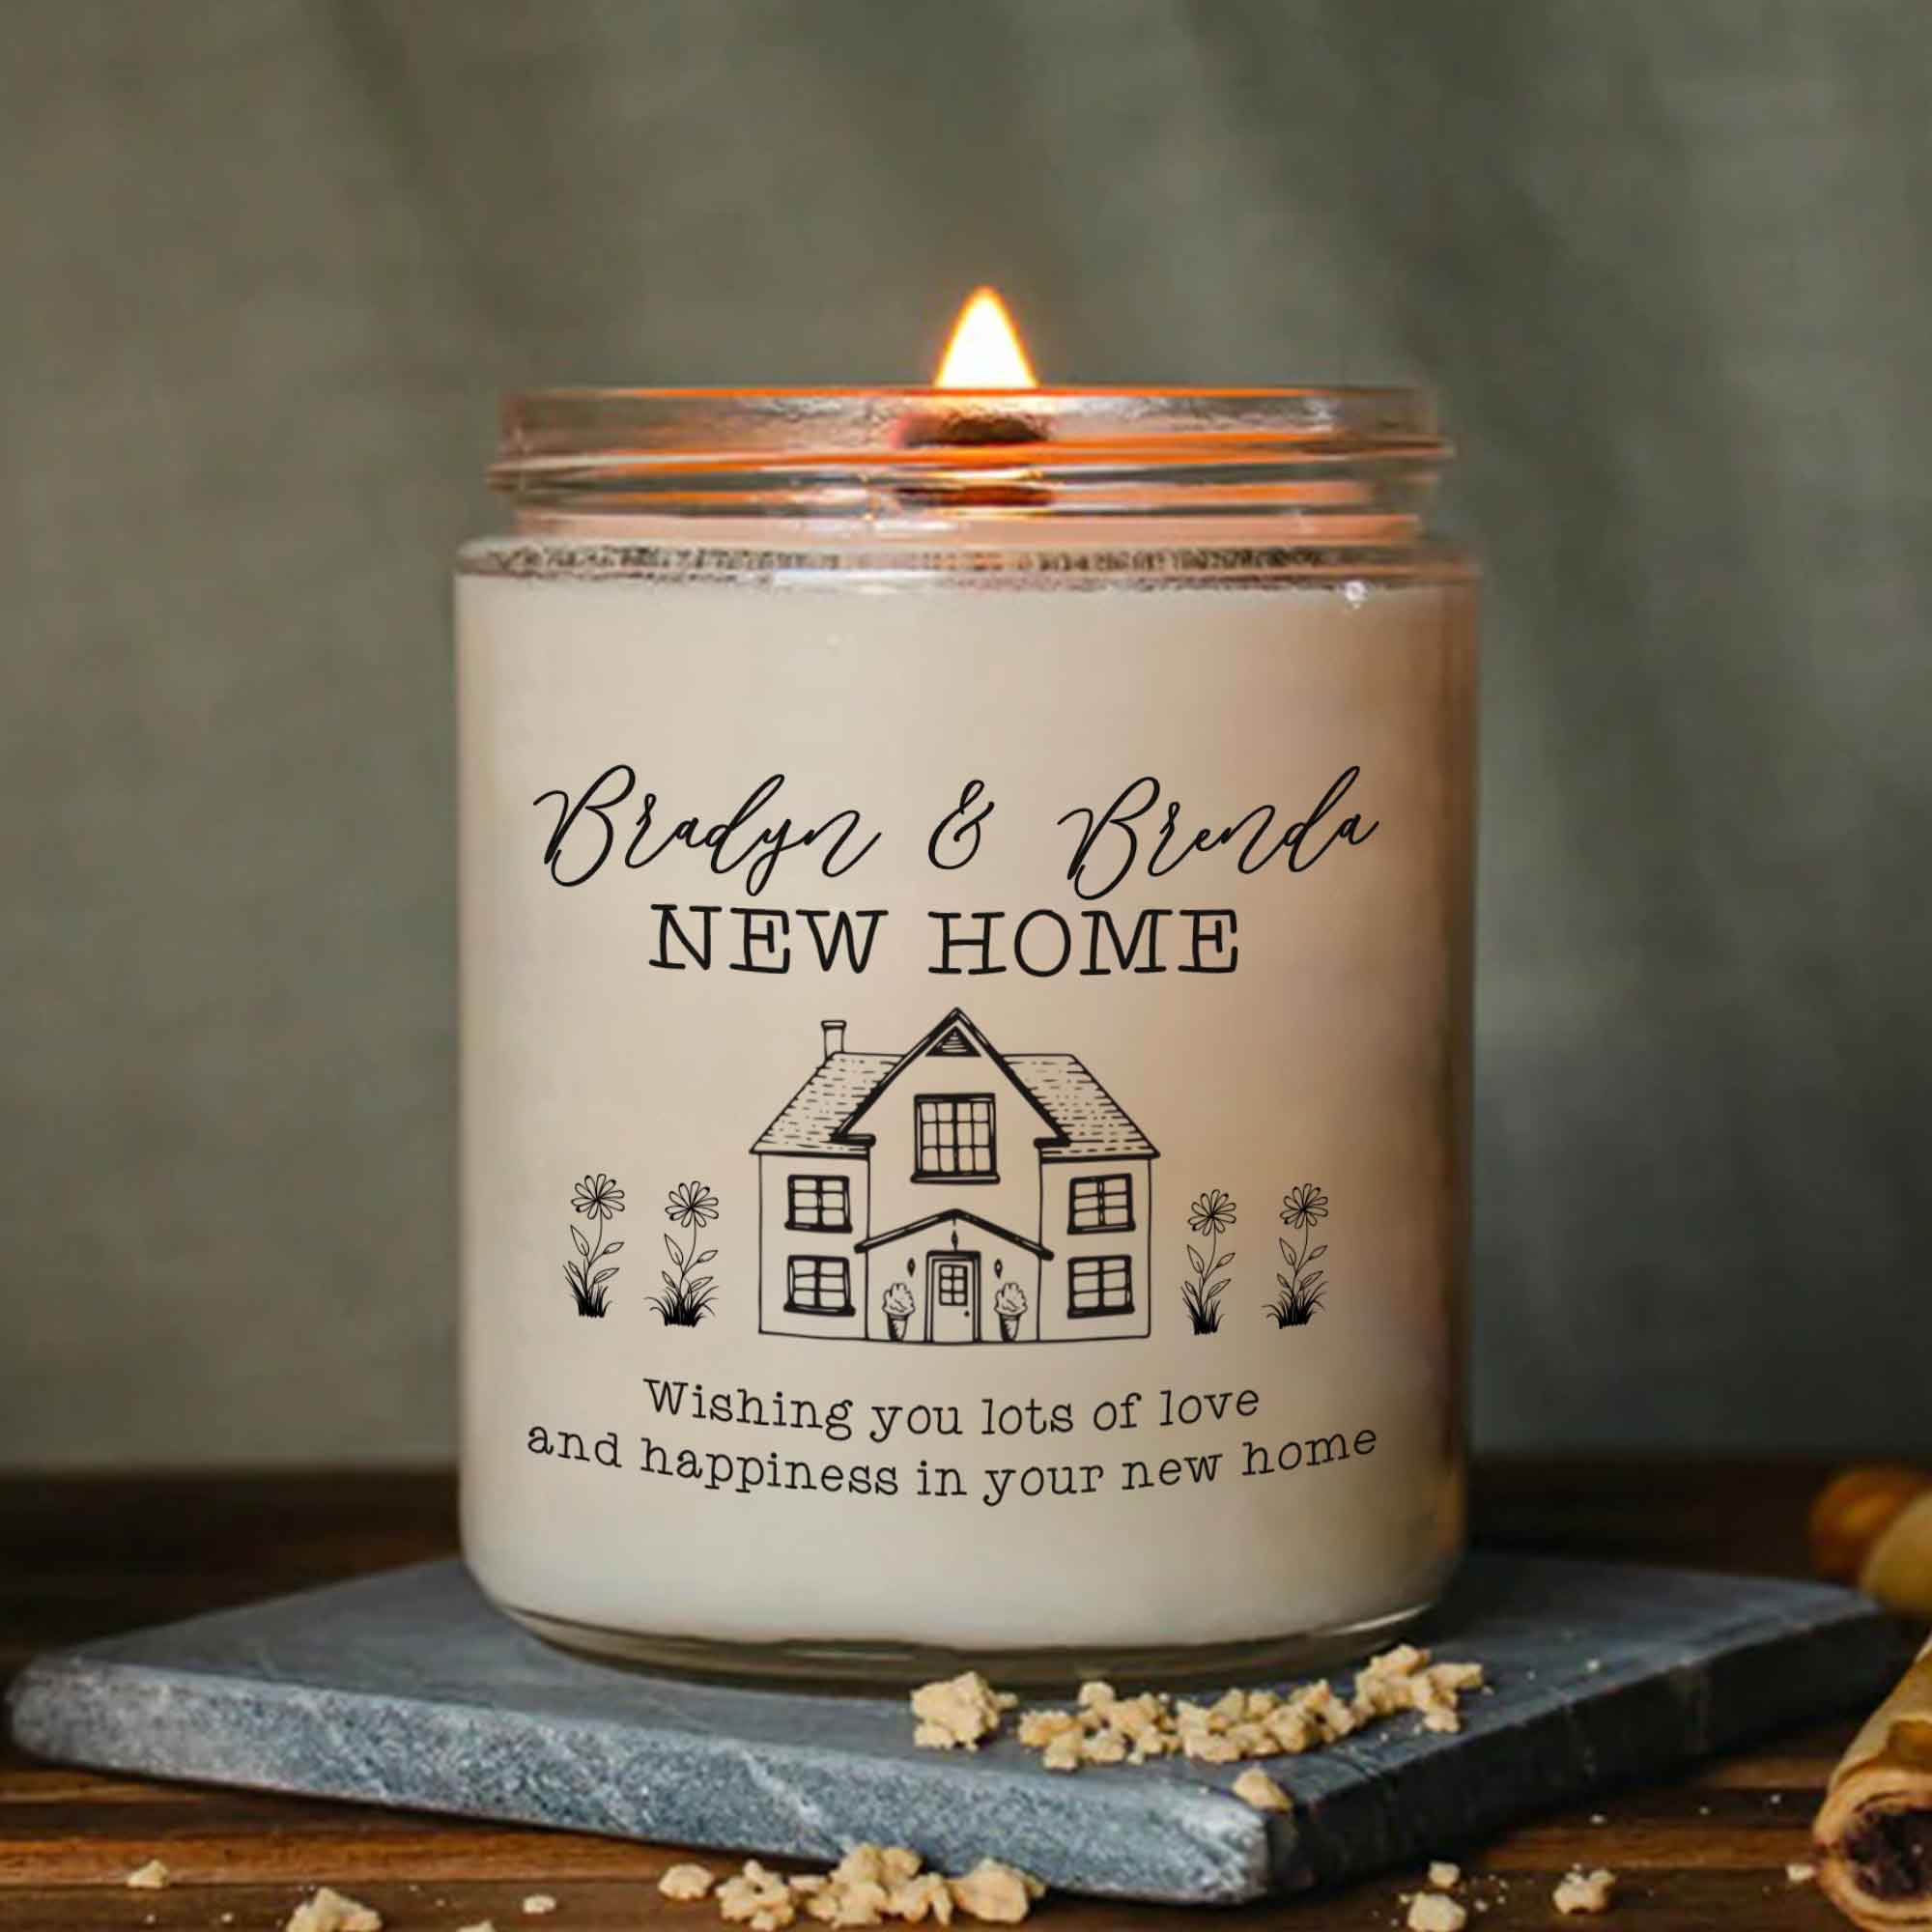 New Home Personalized Candle Gift, Housewarming Candle For Best Friend, Realtor Closing Gift Custom Soy Wax Candle